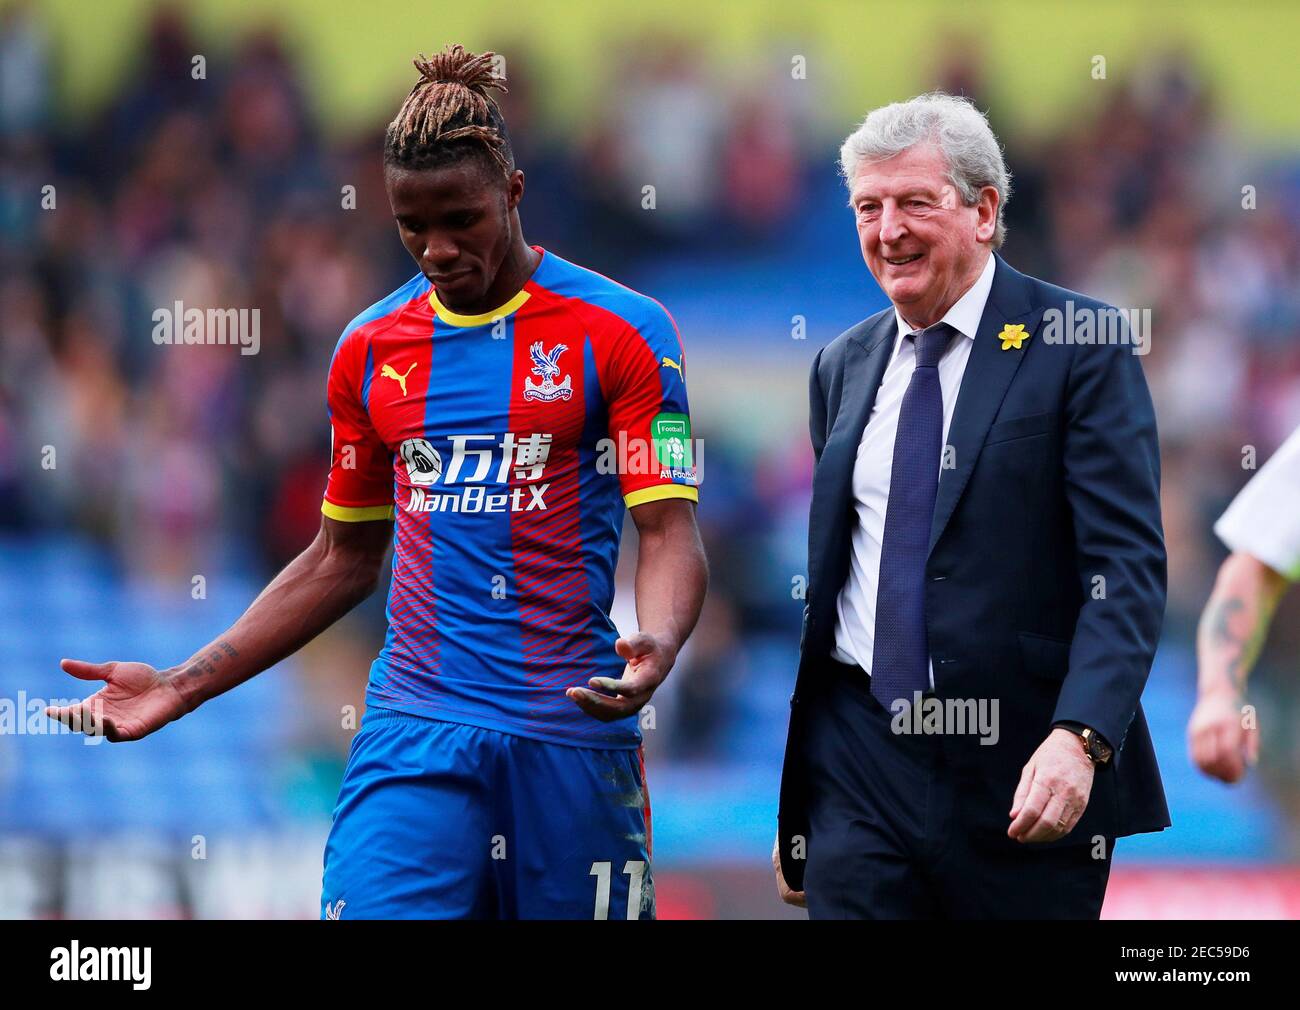 Soccer Football - Premier League - Crystal Palace v Huddersfield Town - Selhurst Park, London, Britain - March 30, 2019  Crystal Palace's Wilfried Zaha with manager Roy Hodgson after the match    Action Images via Reuters/Andrew Couldridge  EDITORIAL USE ONLY. No use with unauthorized audio, video, data, fixture lists, club/league logos or 'live' services. Online in-match use limited to 75 images, no video emulation. No use in betting, games or single club/league/player publications.  Please contact your account representative for further details. Stock Photo